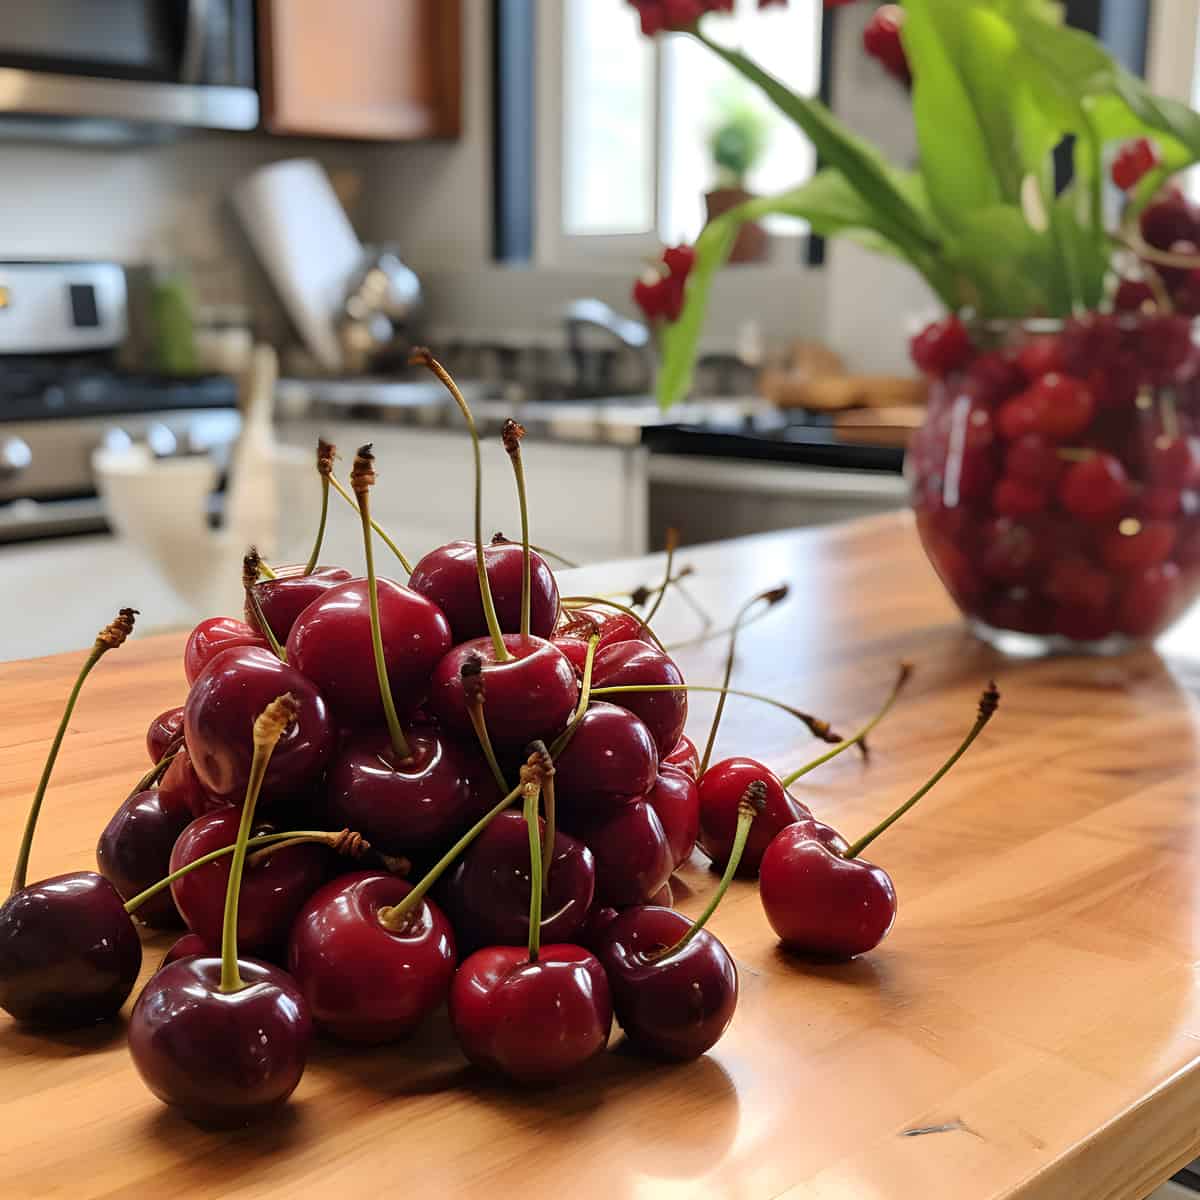 Afghan Cherries on a kitchen counter